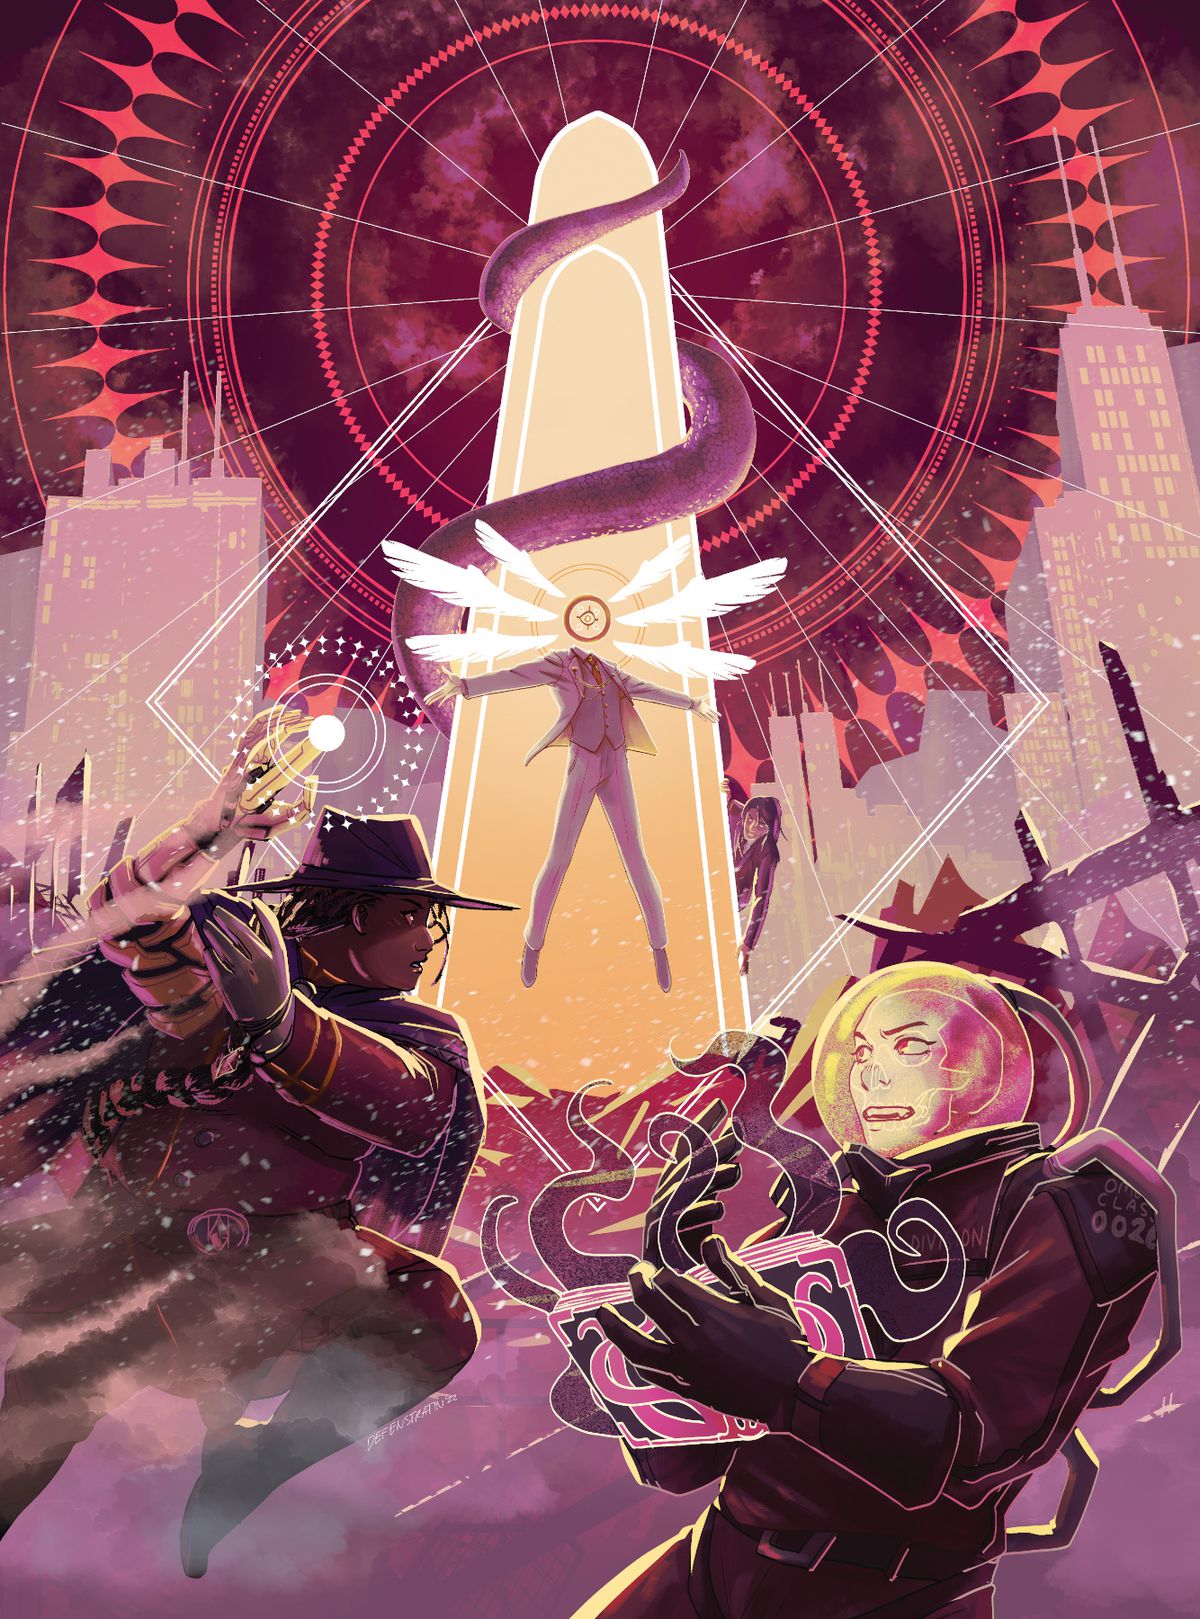 Cover Art for Apocalypse Keys shows a headless, angelic creature ascending a pillar of light. A single tentacle is wrapped around that pilar. Two player characters stand in the foreground, rushing to action. One carries a book with tentacles leaping from its pages.